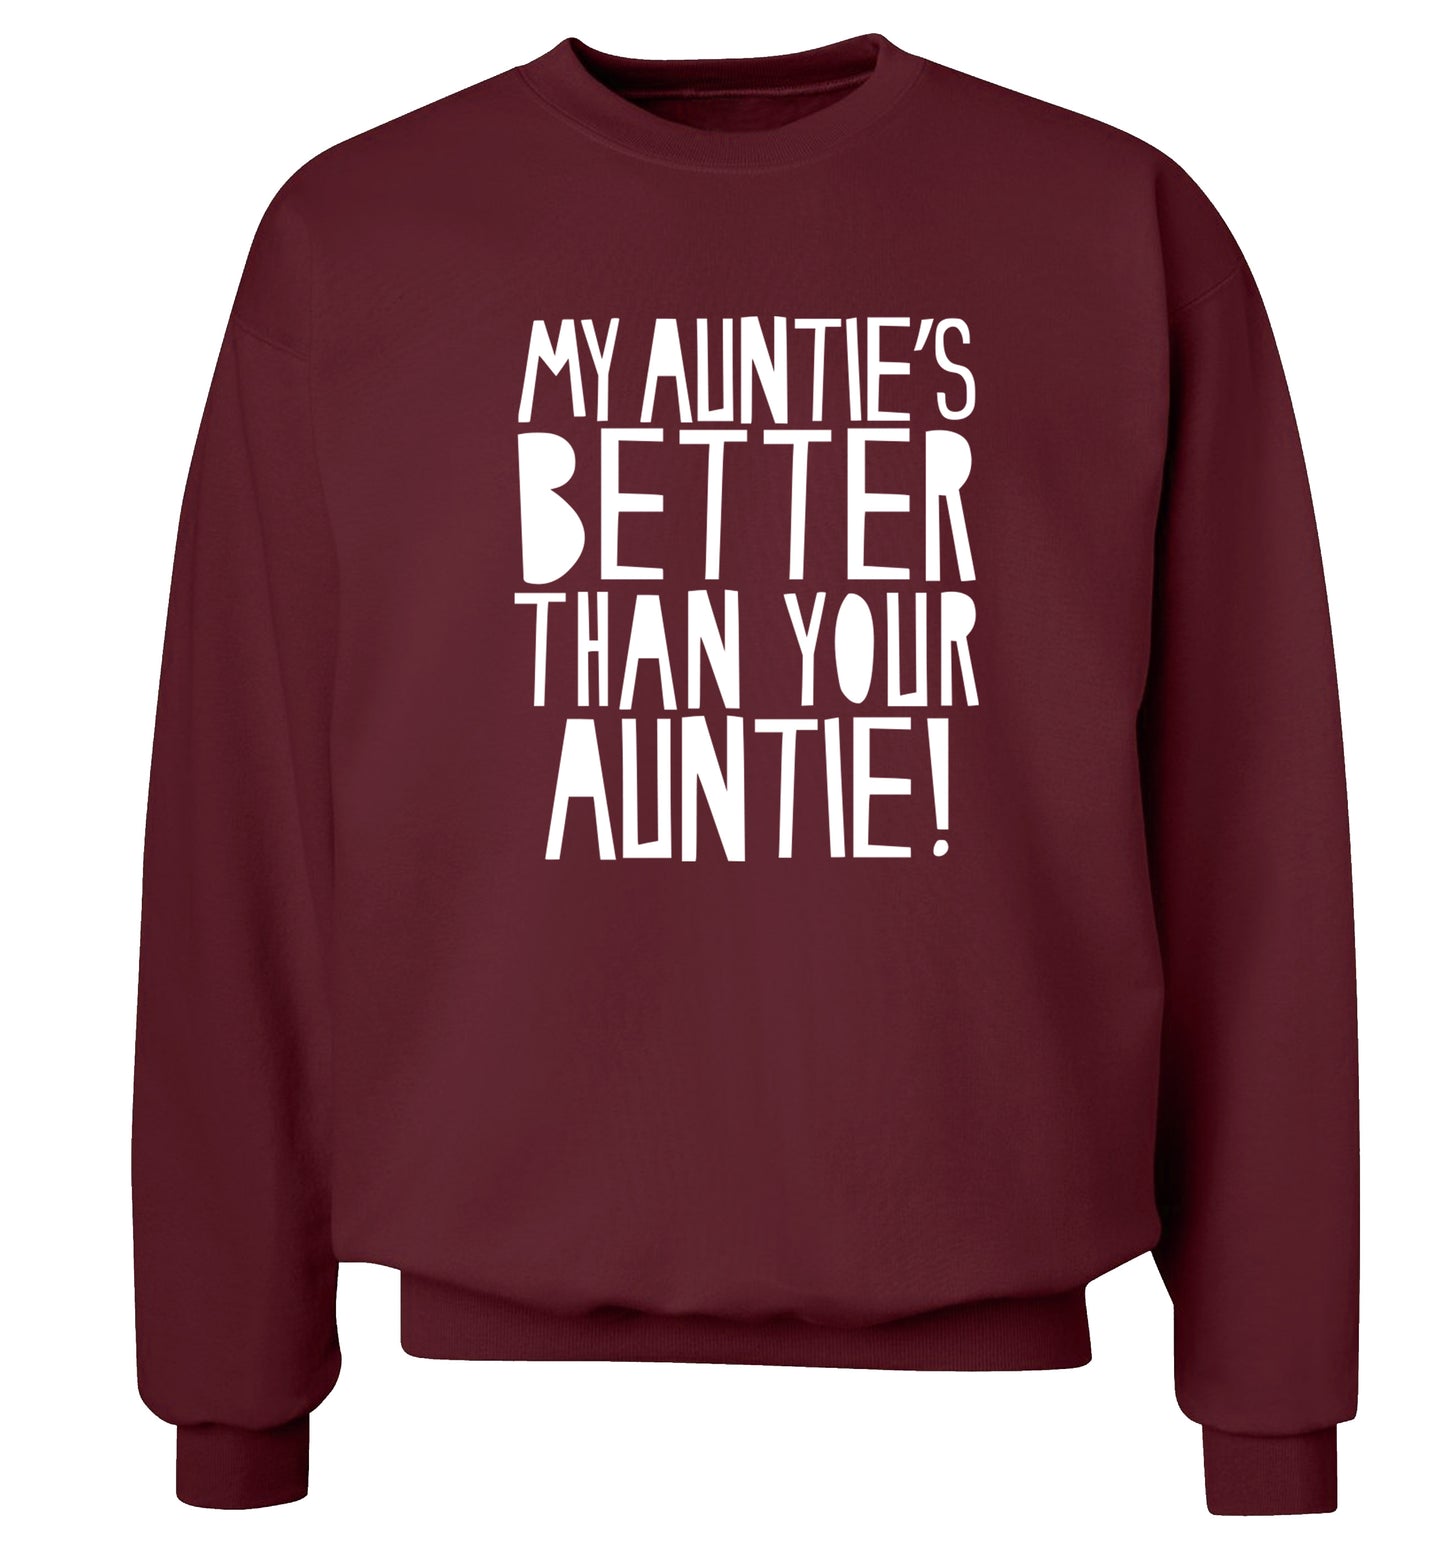 My auntie's better than your auntie Adult's unisex maroon Sweater 2XL